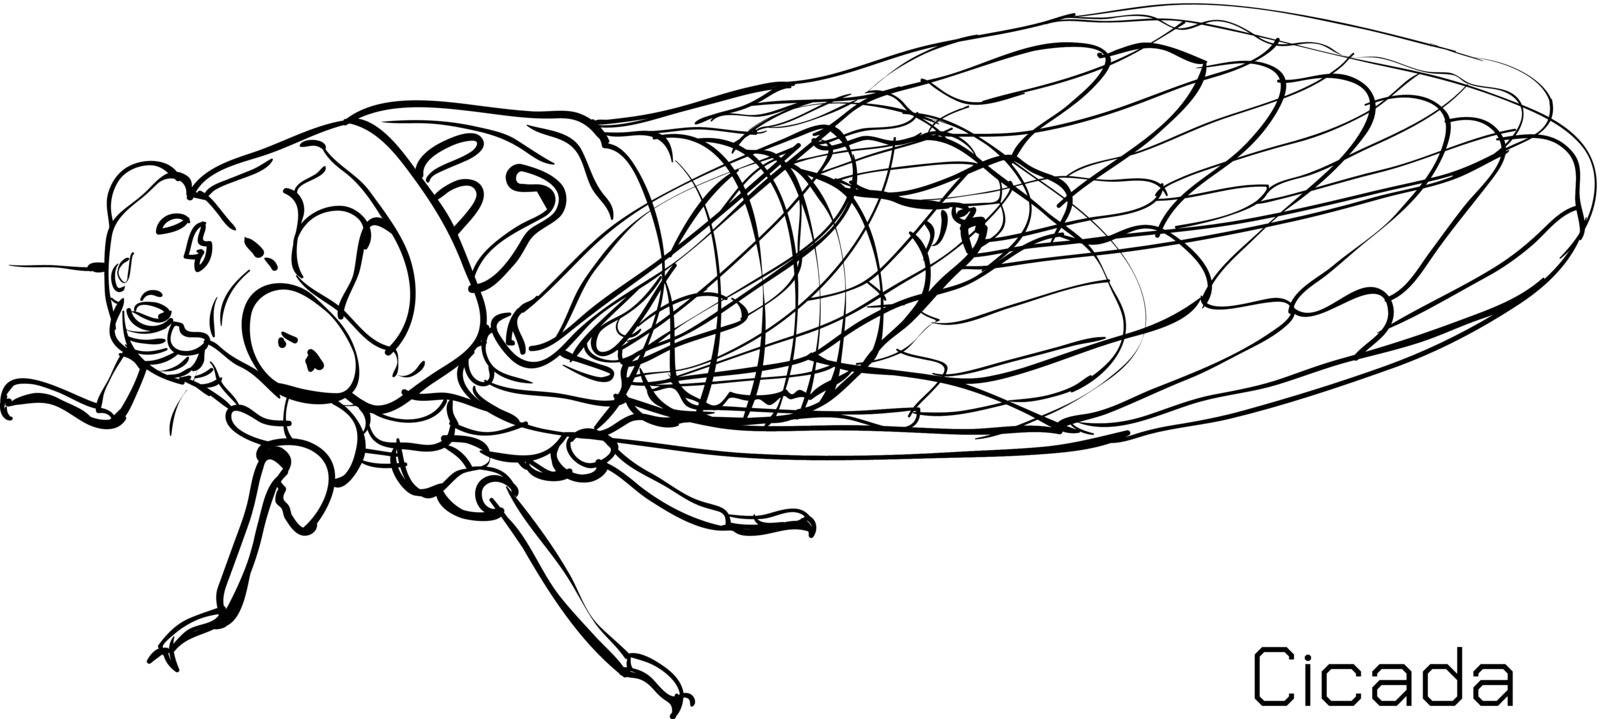 Drawing of cicada  by hadkhanong